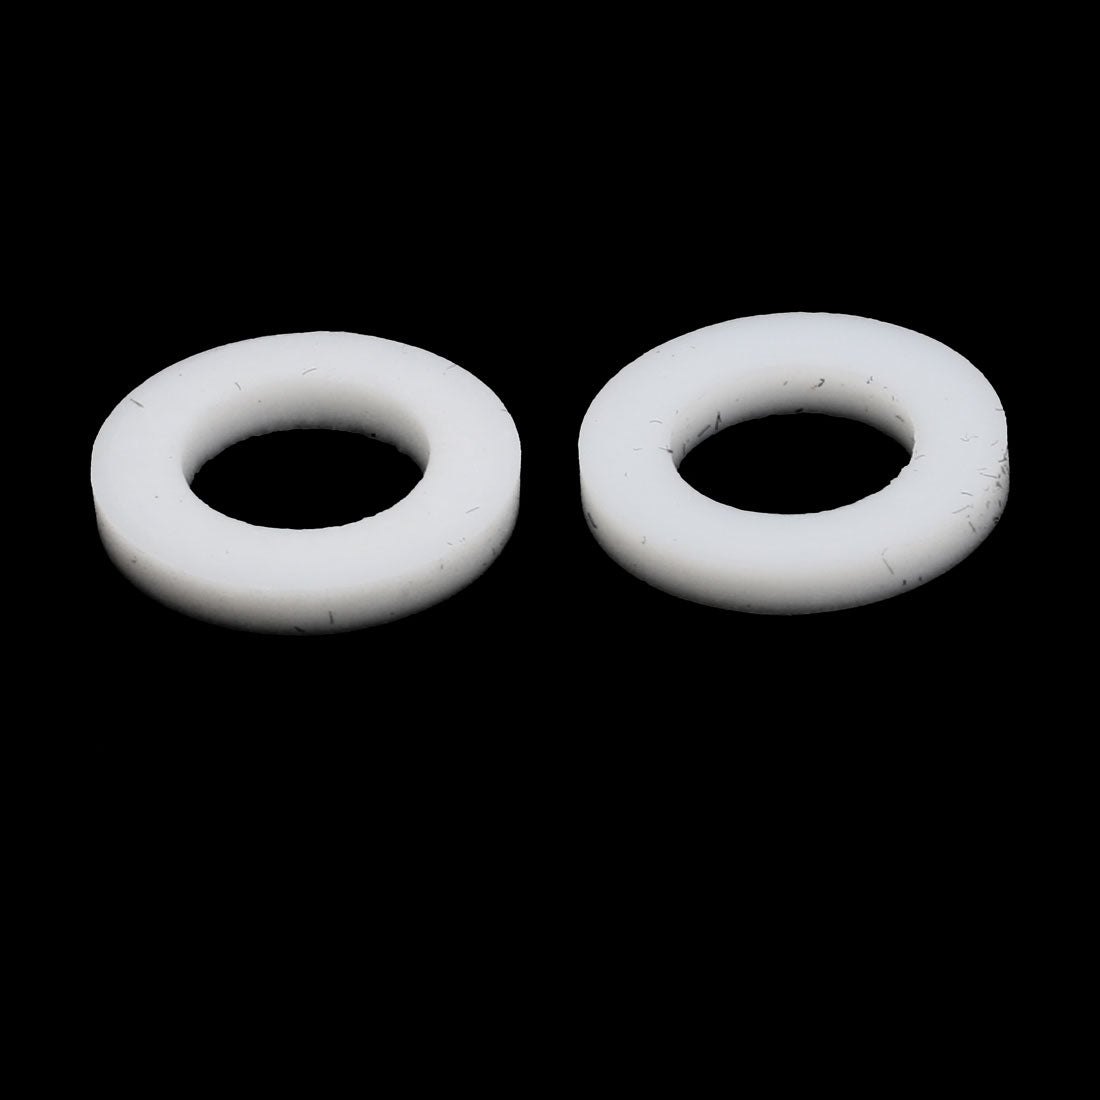 uxcell Uxcell PTFE Insulation Flat Spacer Washers Gasket Rings, Polytetrafluoroethylene Clear, Pack of 20